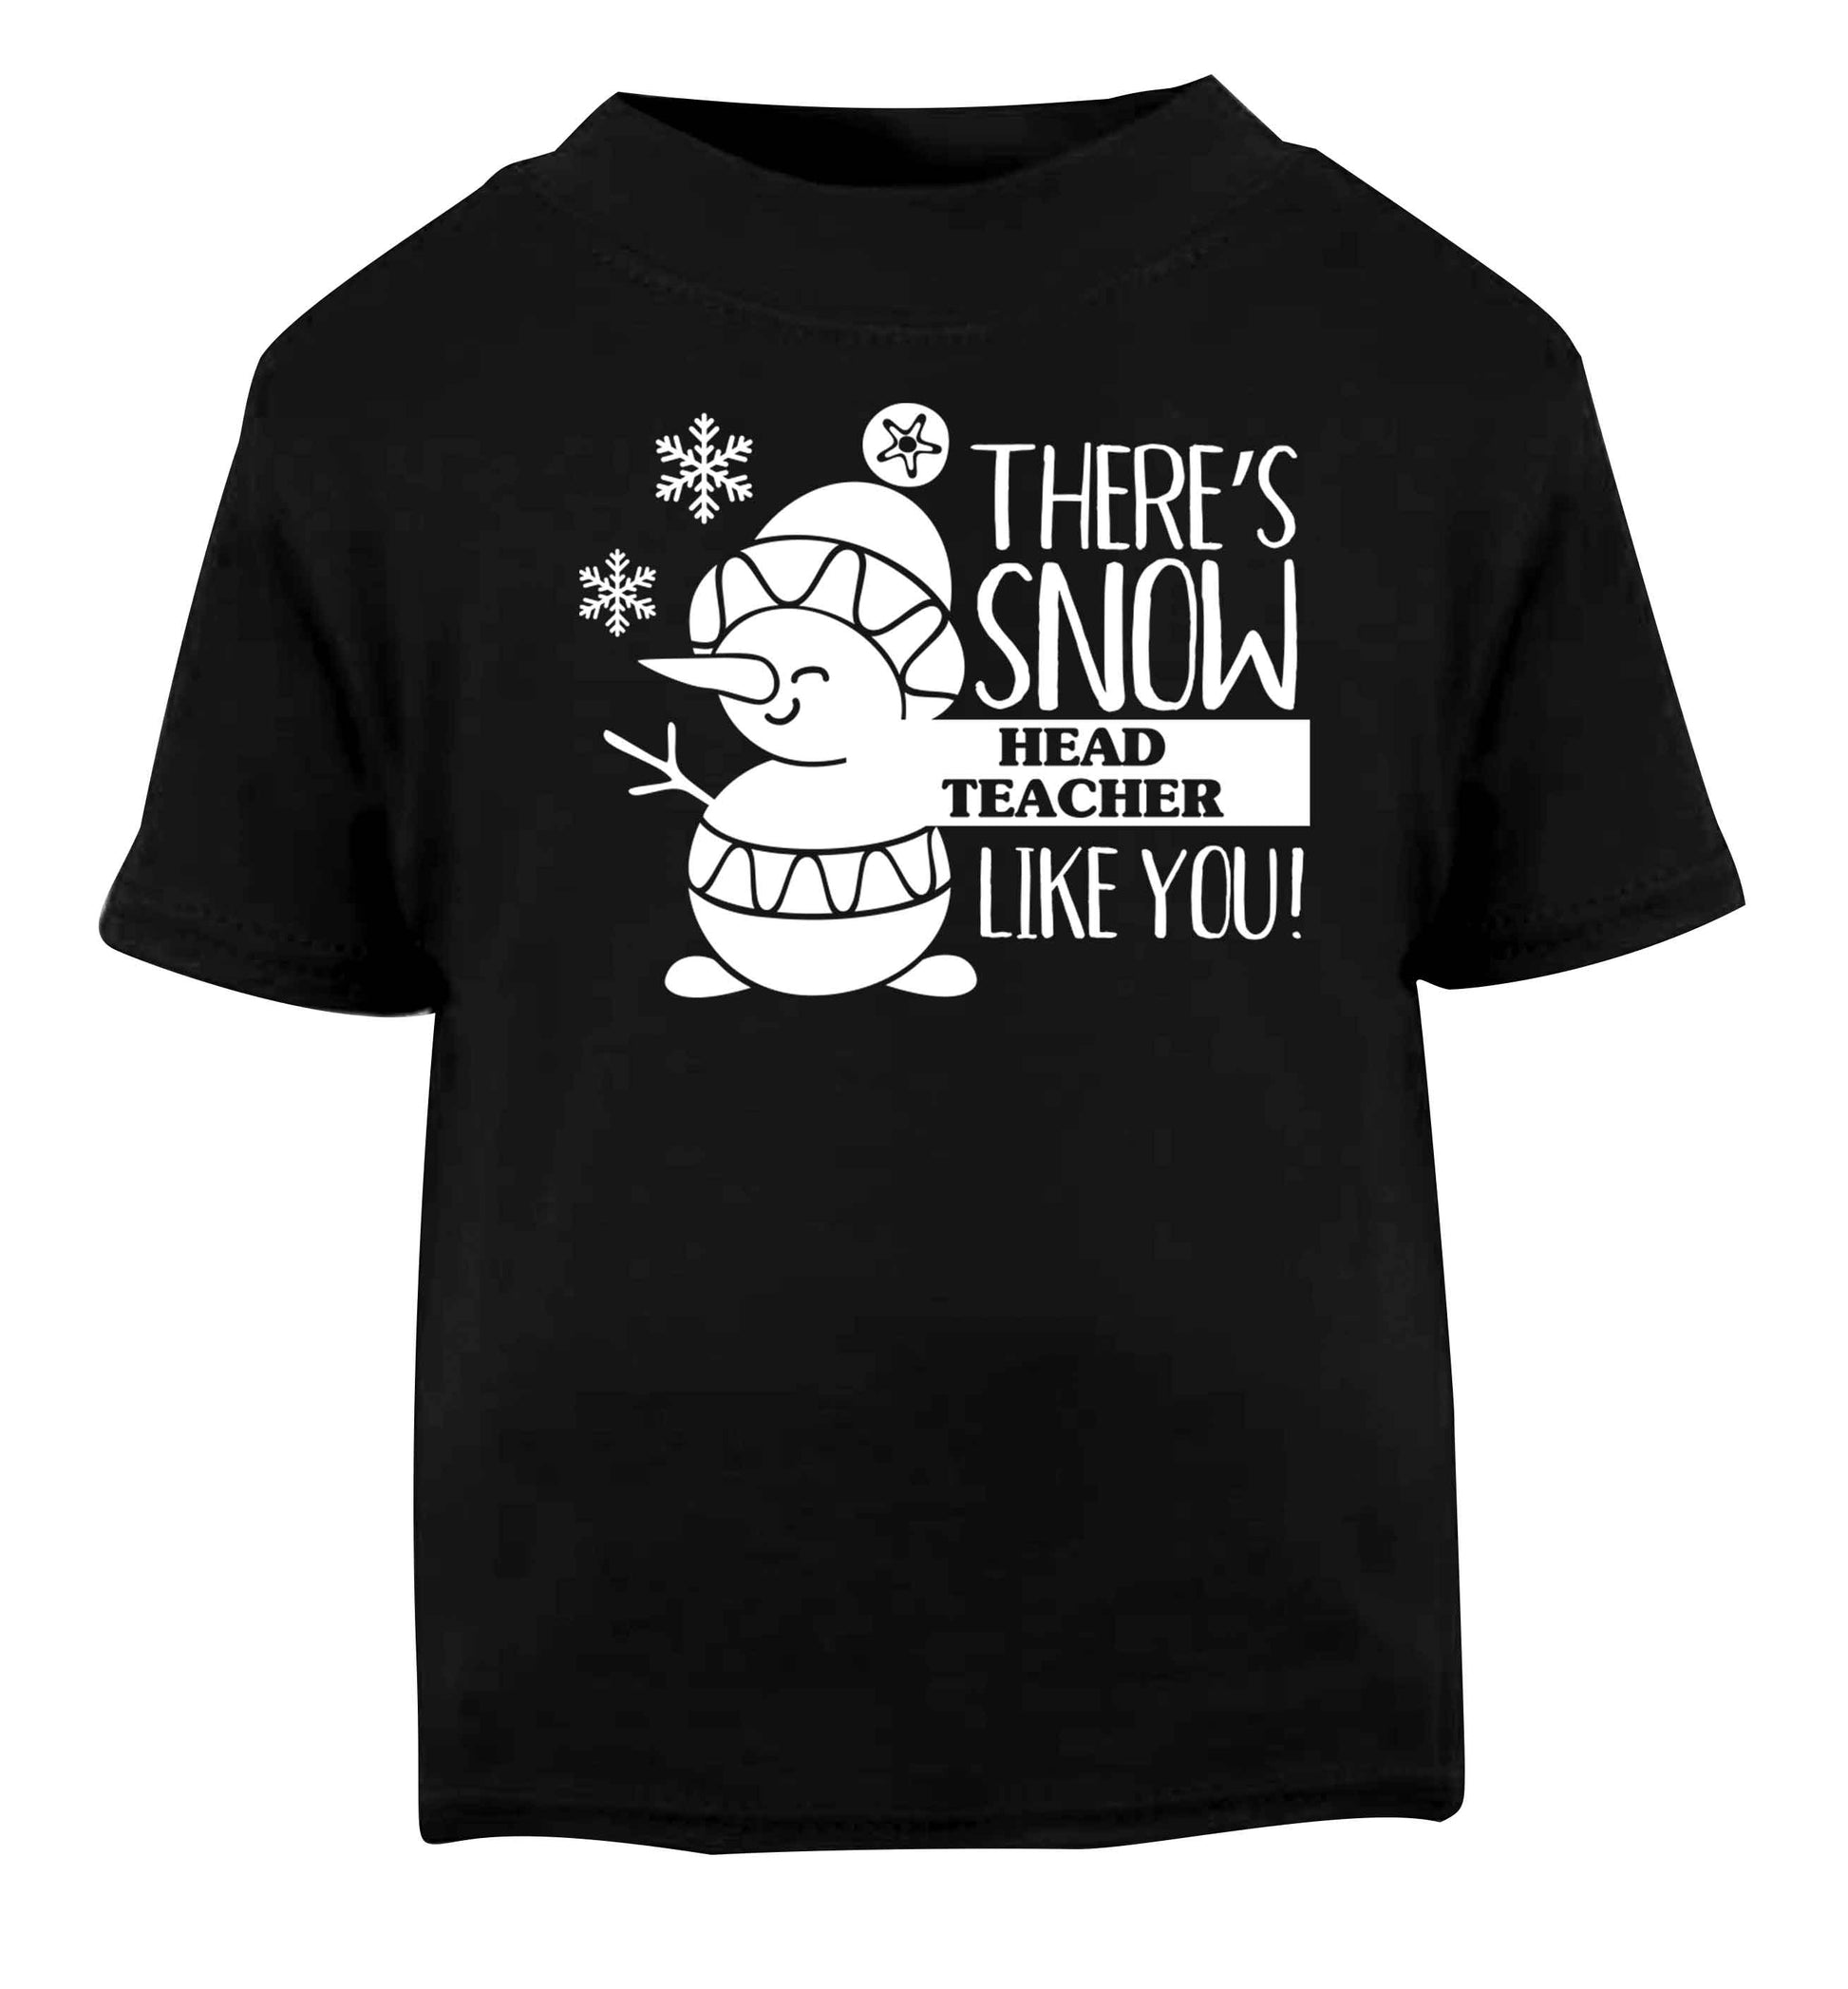 There's snow head teacher like you Black baby toddler Tshirt 2 years